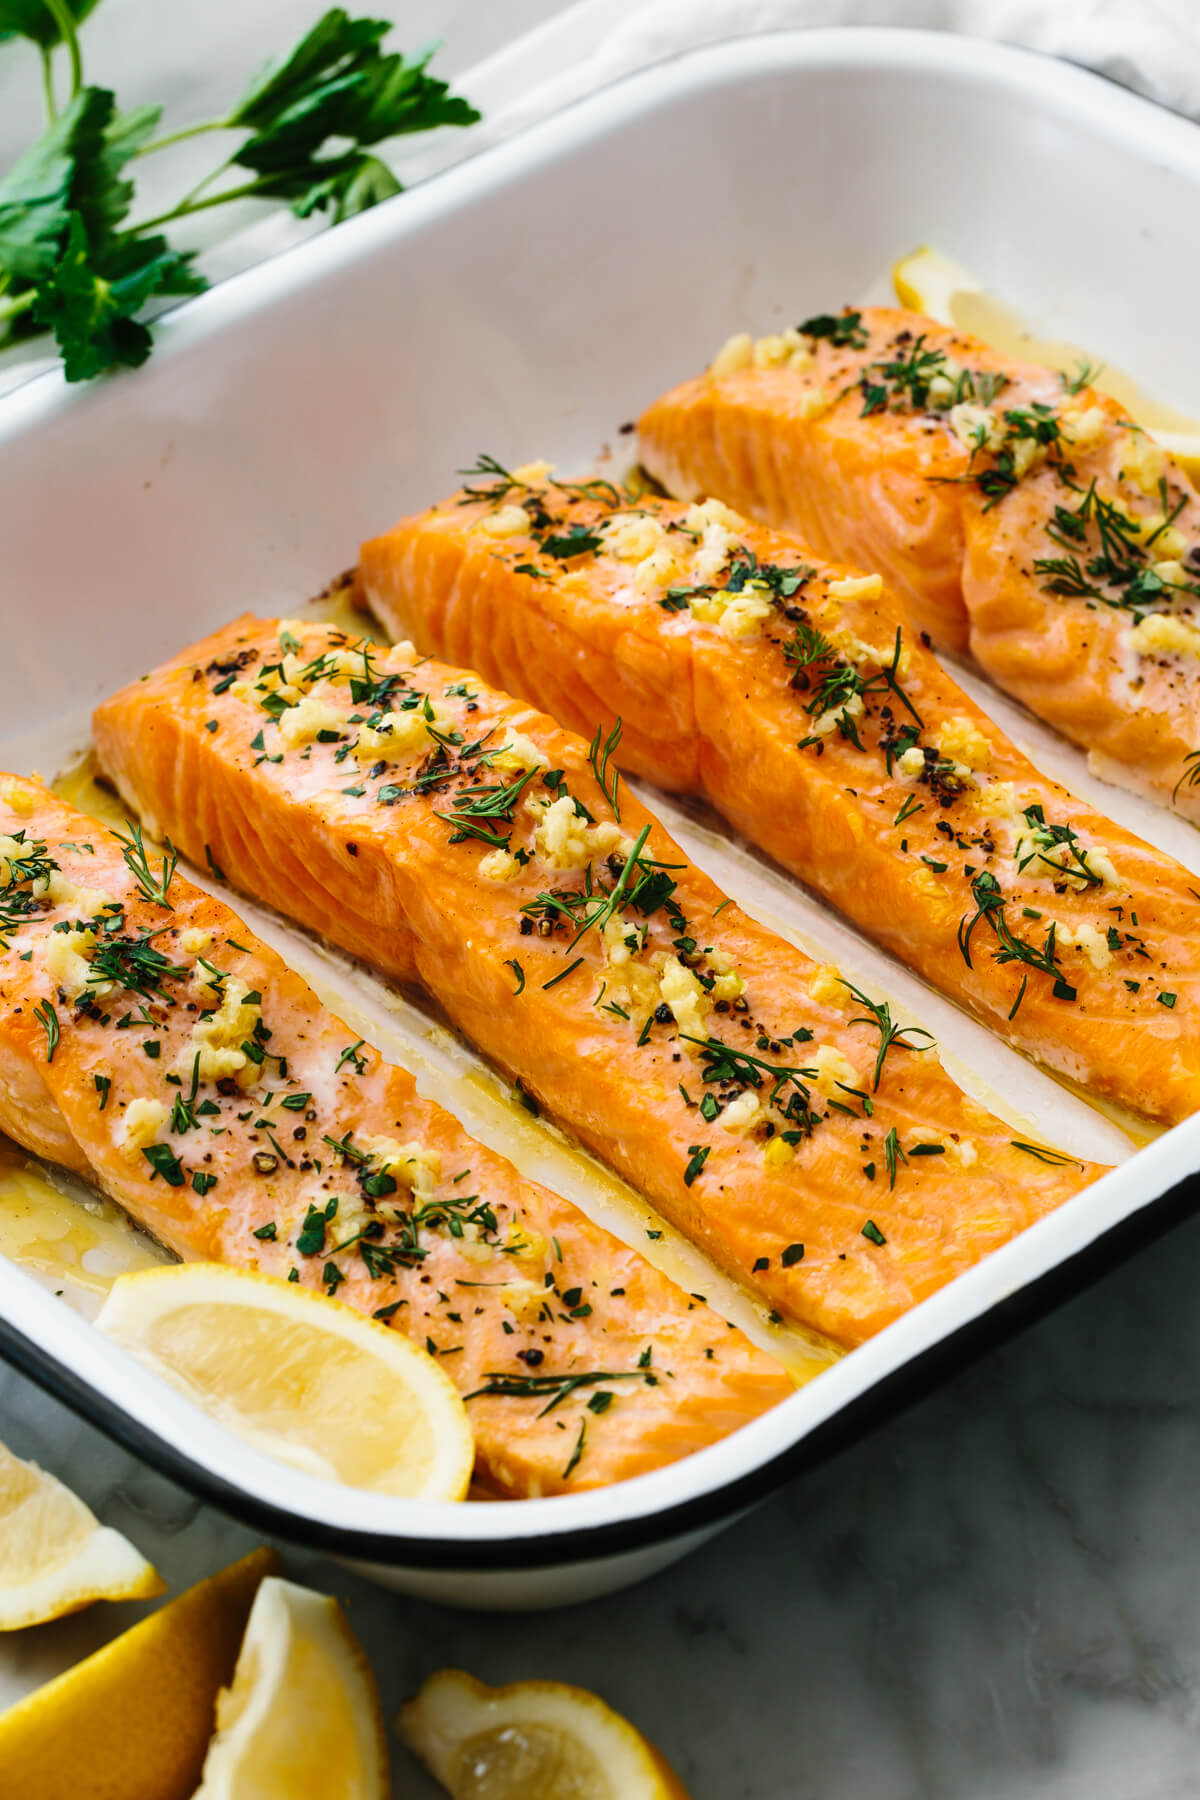 Baked salmon in a pan next to lemon wedges.